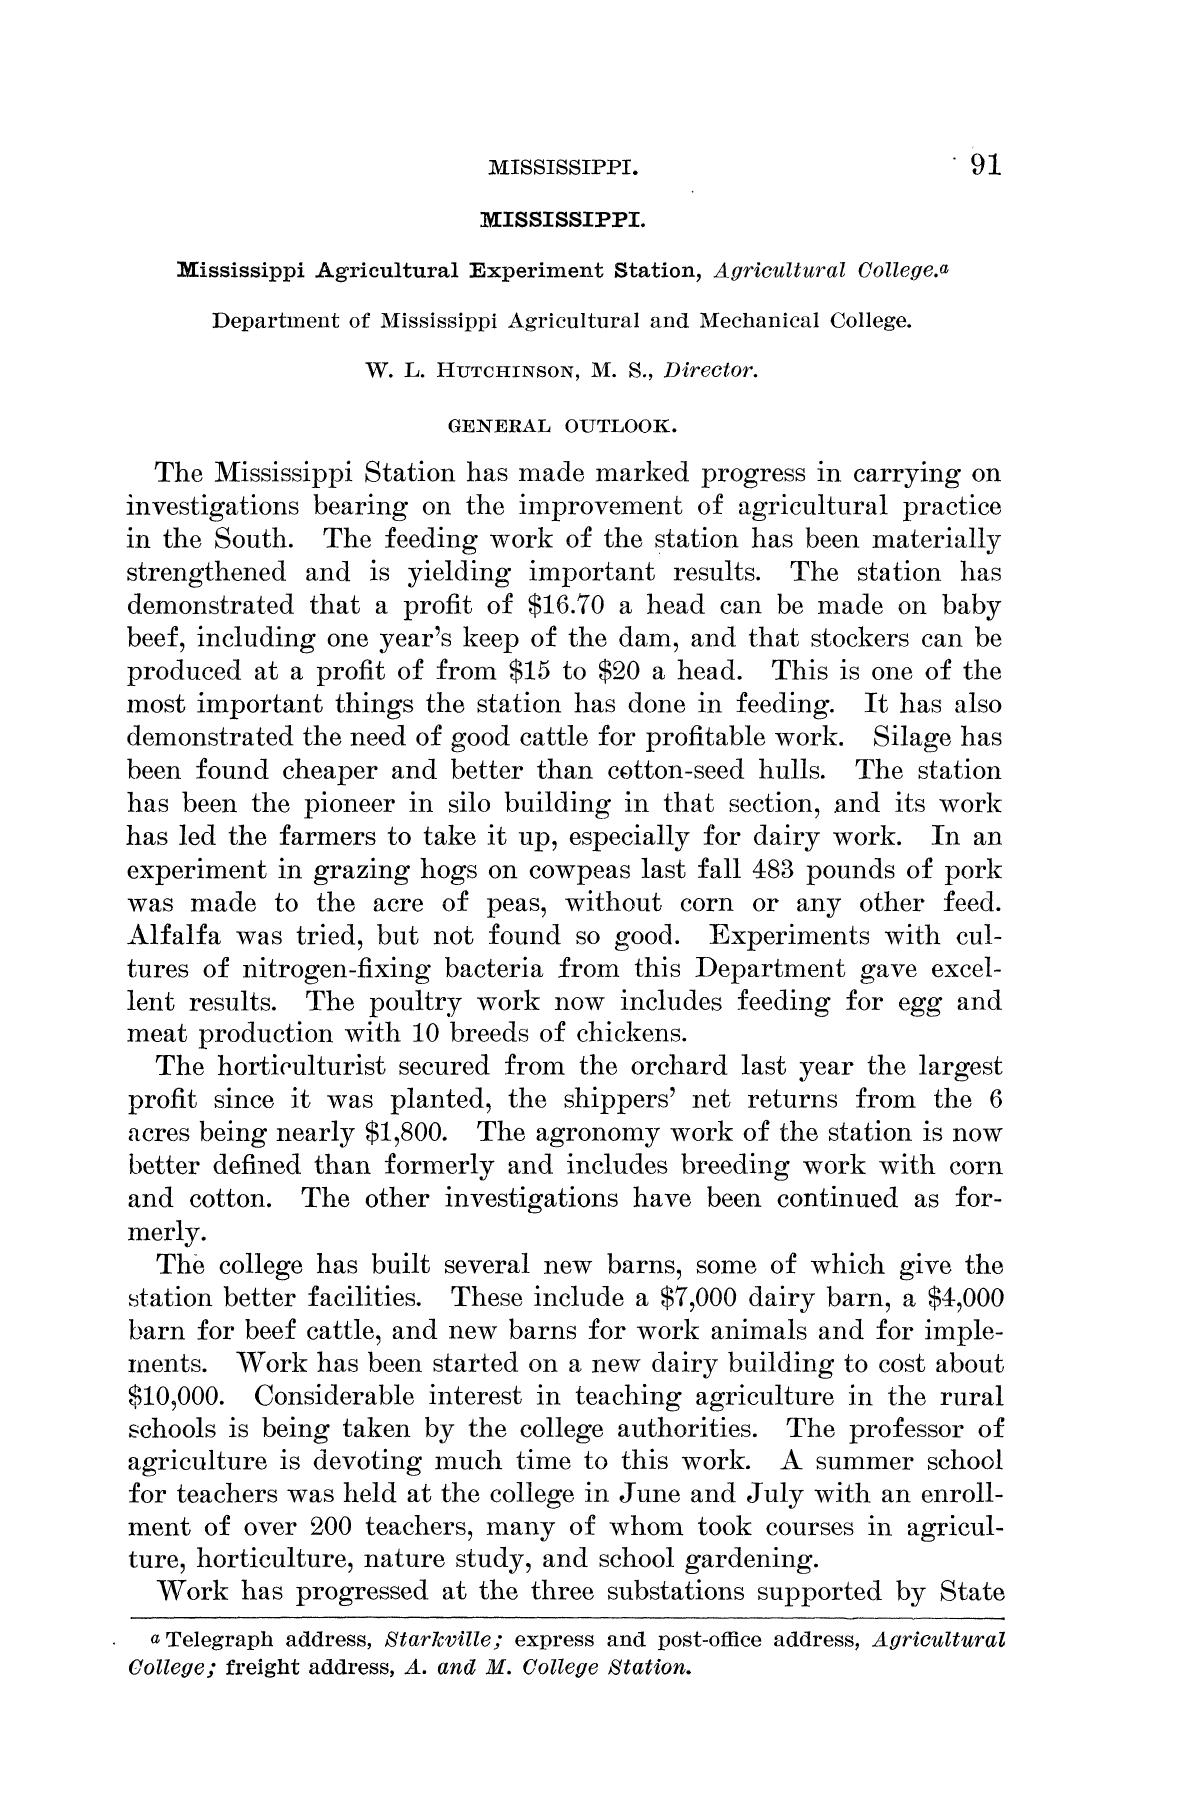 Annual Report of the Office of Experiment Stations, June 30, 1905
                                                
                                                    91
                                                